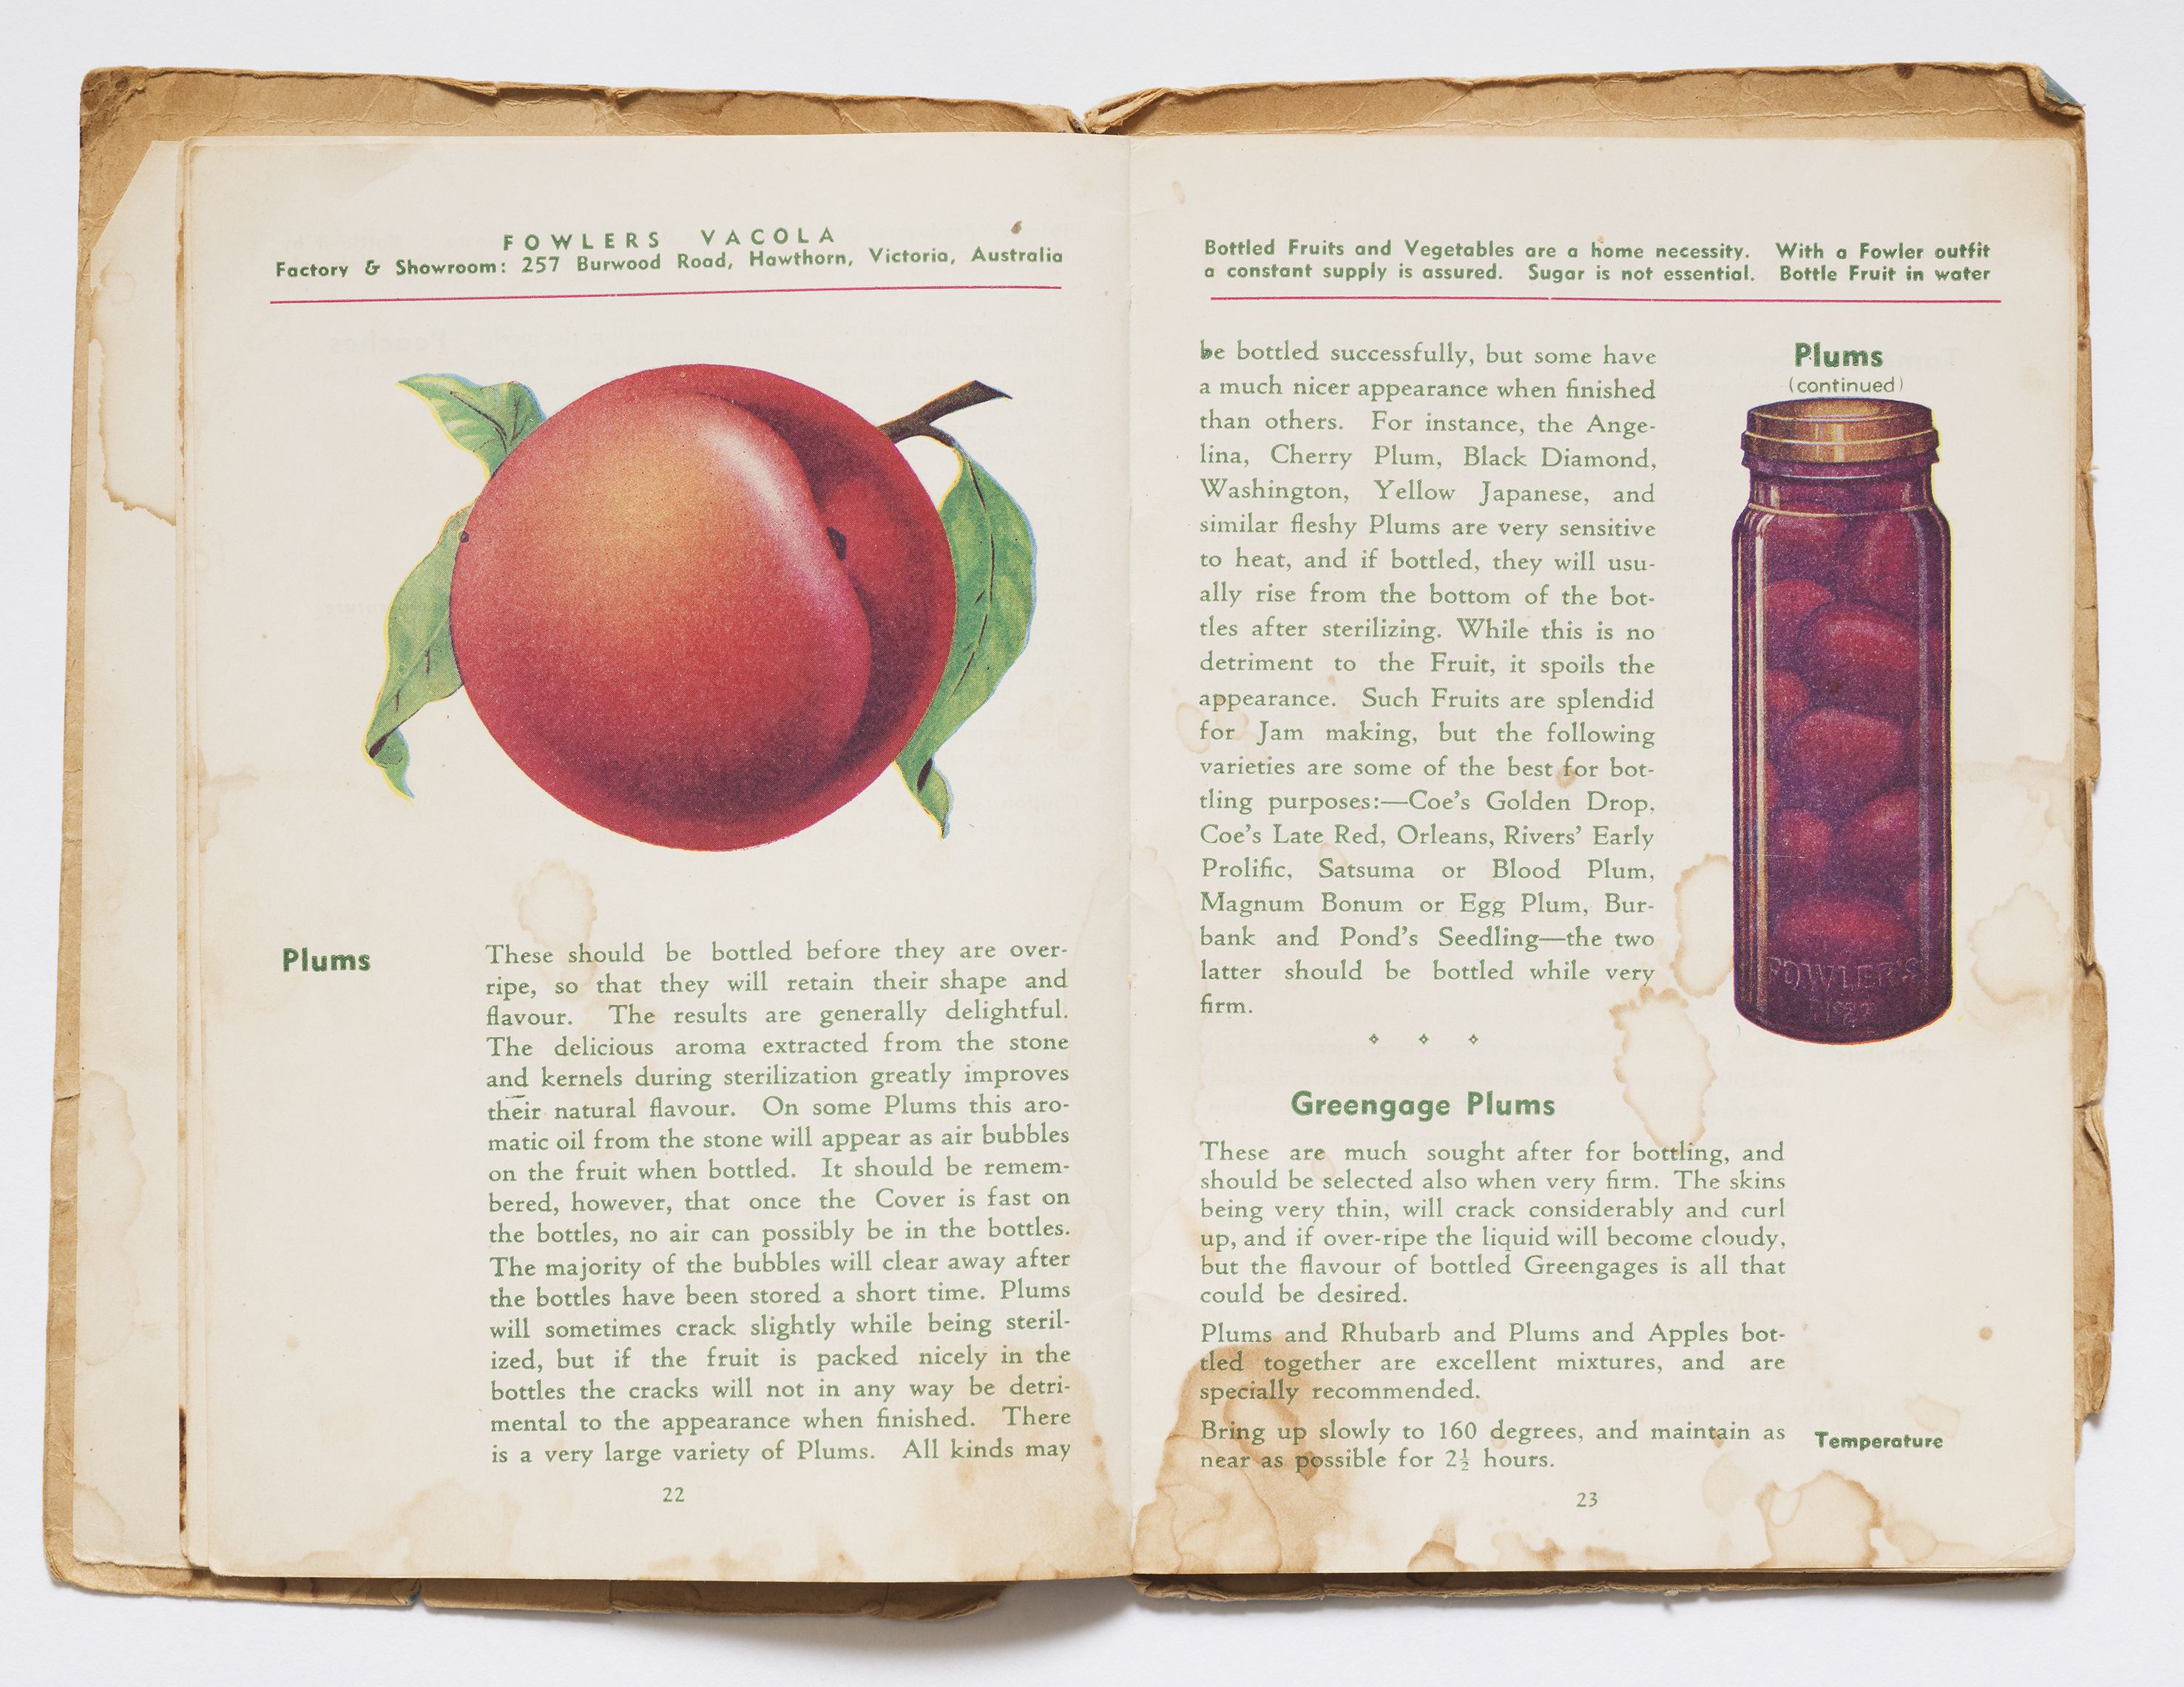 A page from the Fowlers booklet that features a coloured illustration of bottled plums.